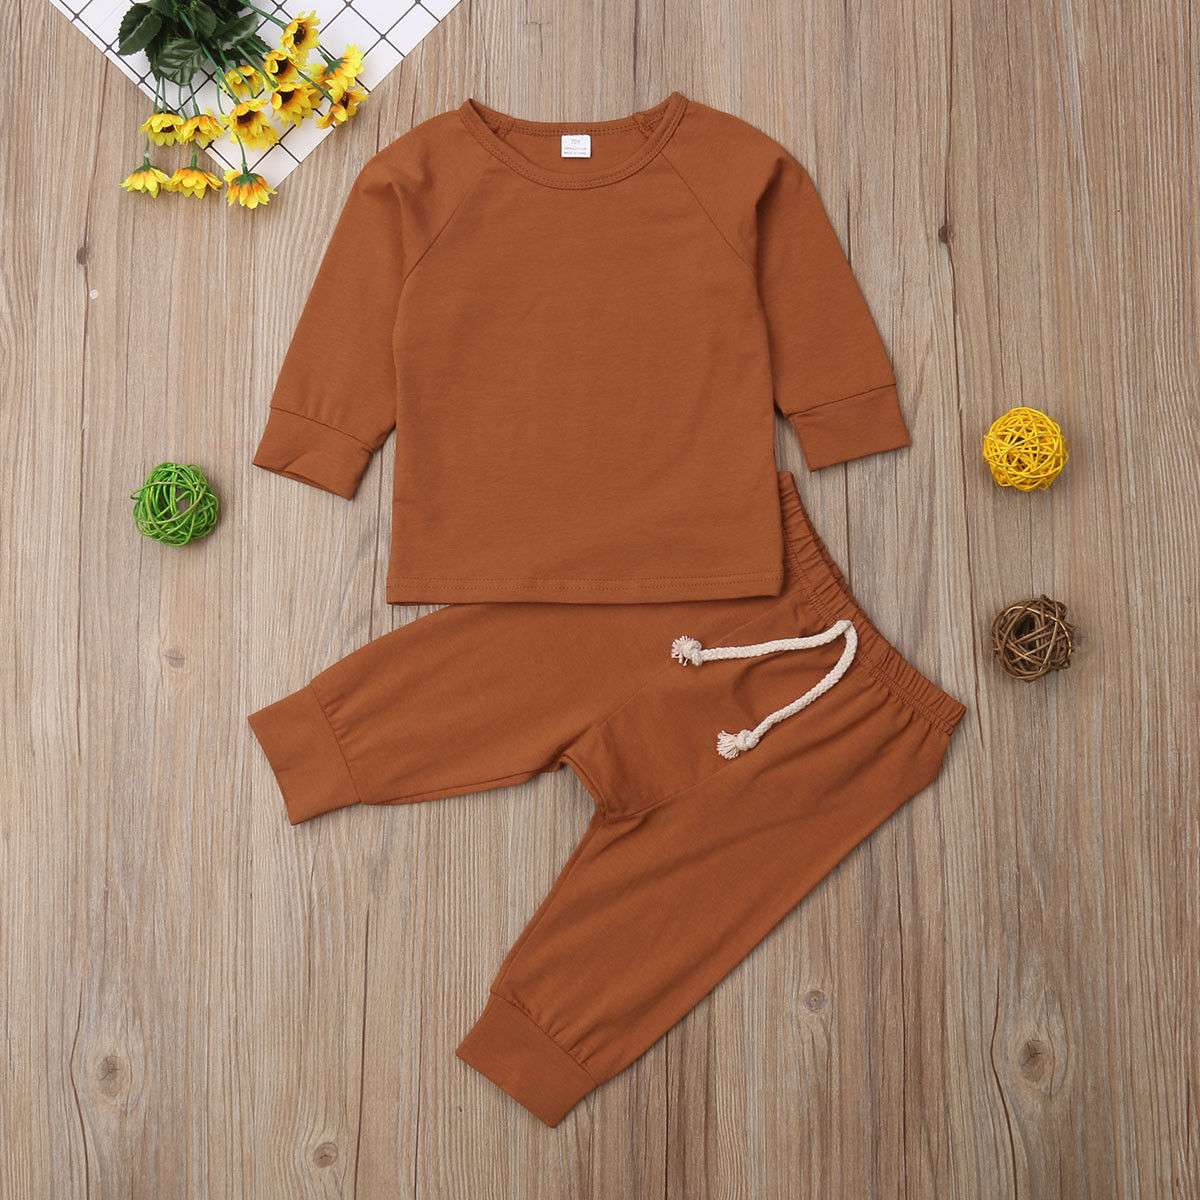 Casual Newborn Baby Boy Girl Solid Color Long Sleeve Cotton T-shirt Tops Long Pant 2PCS Homewear Baby Clothing Set